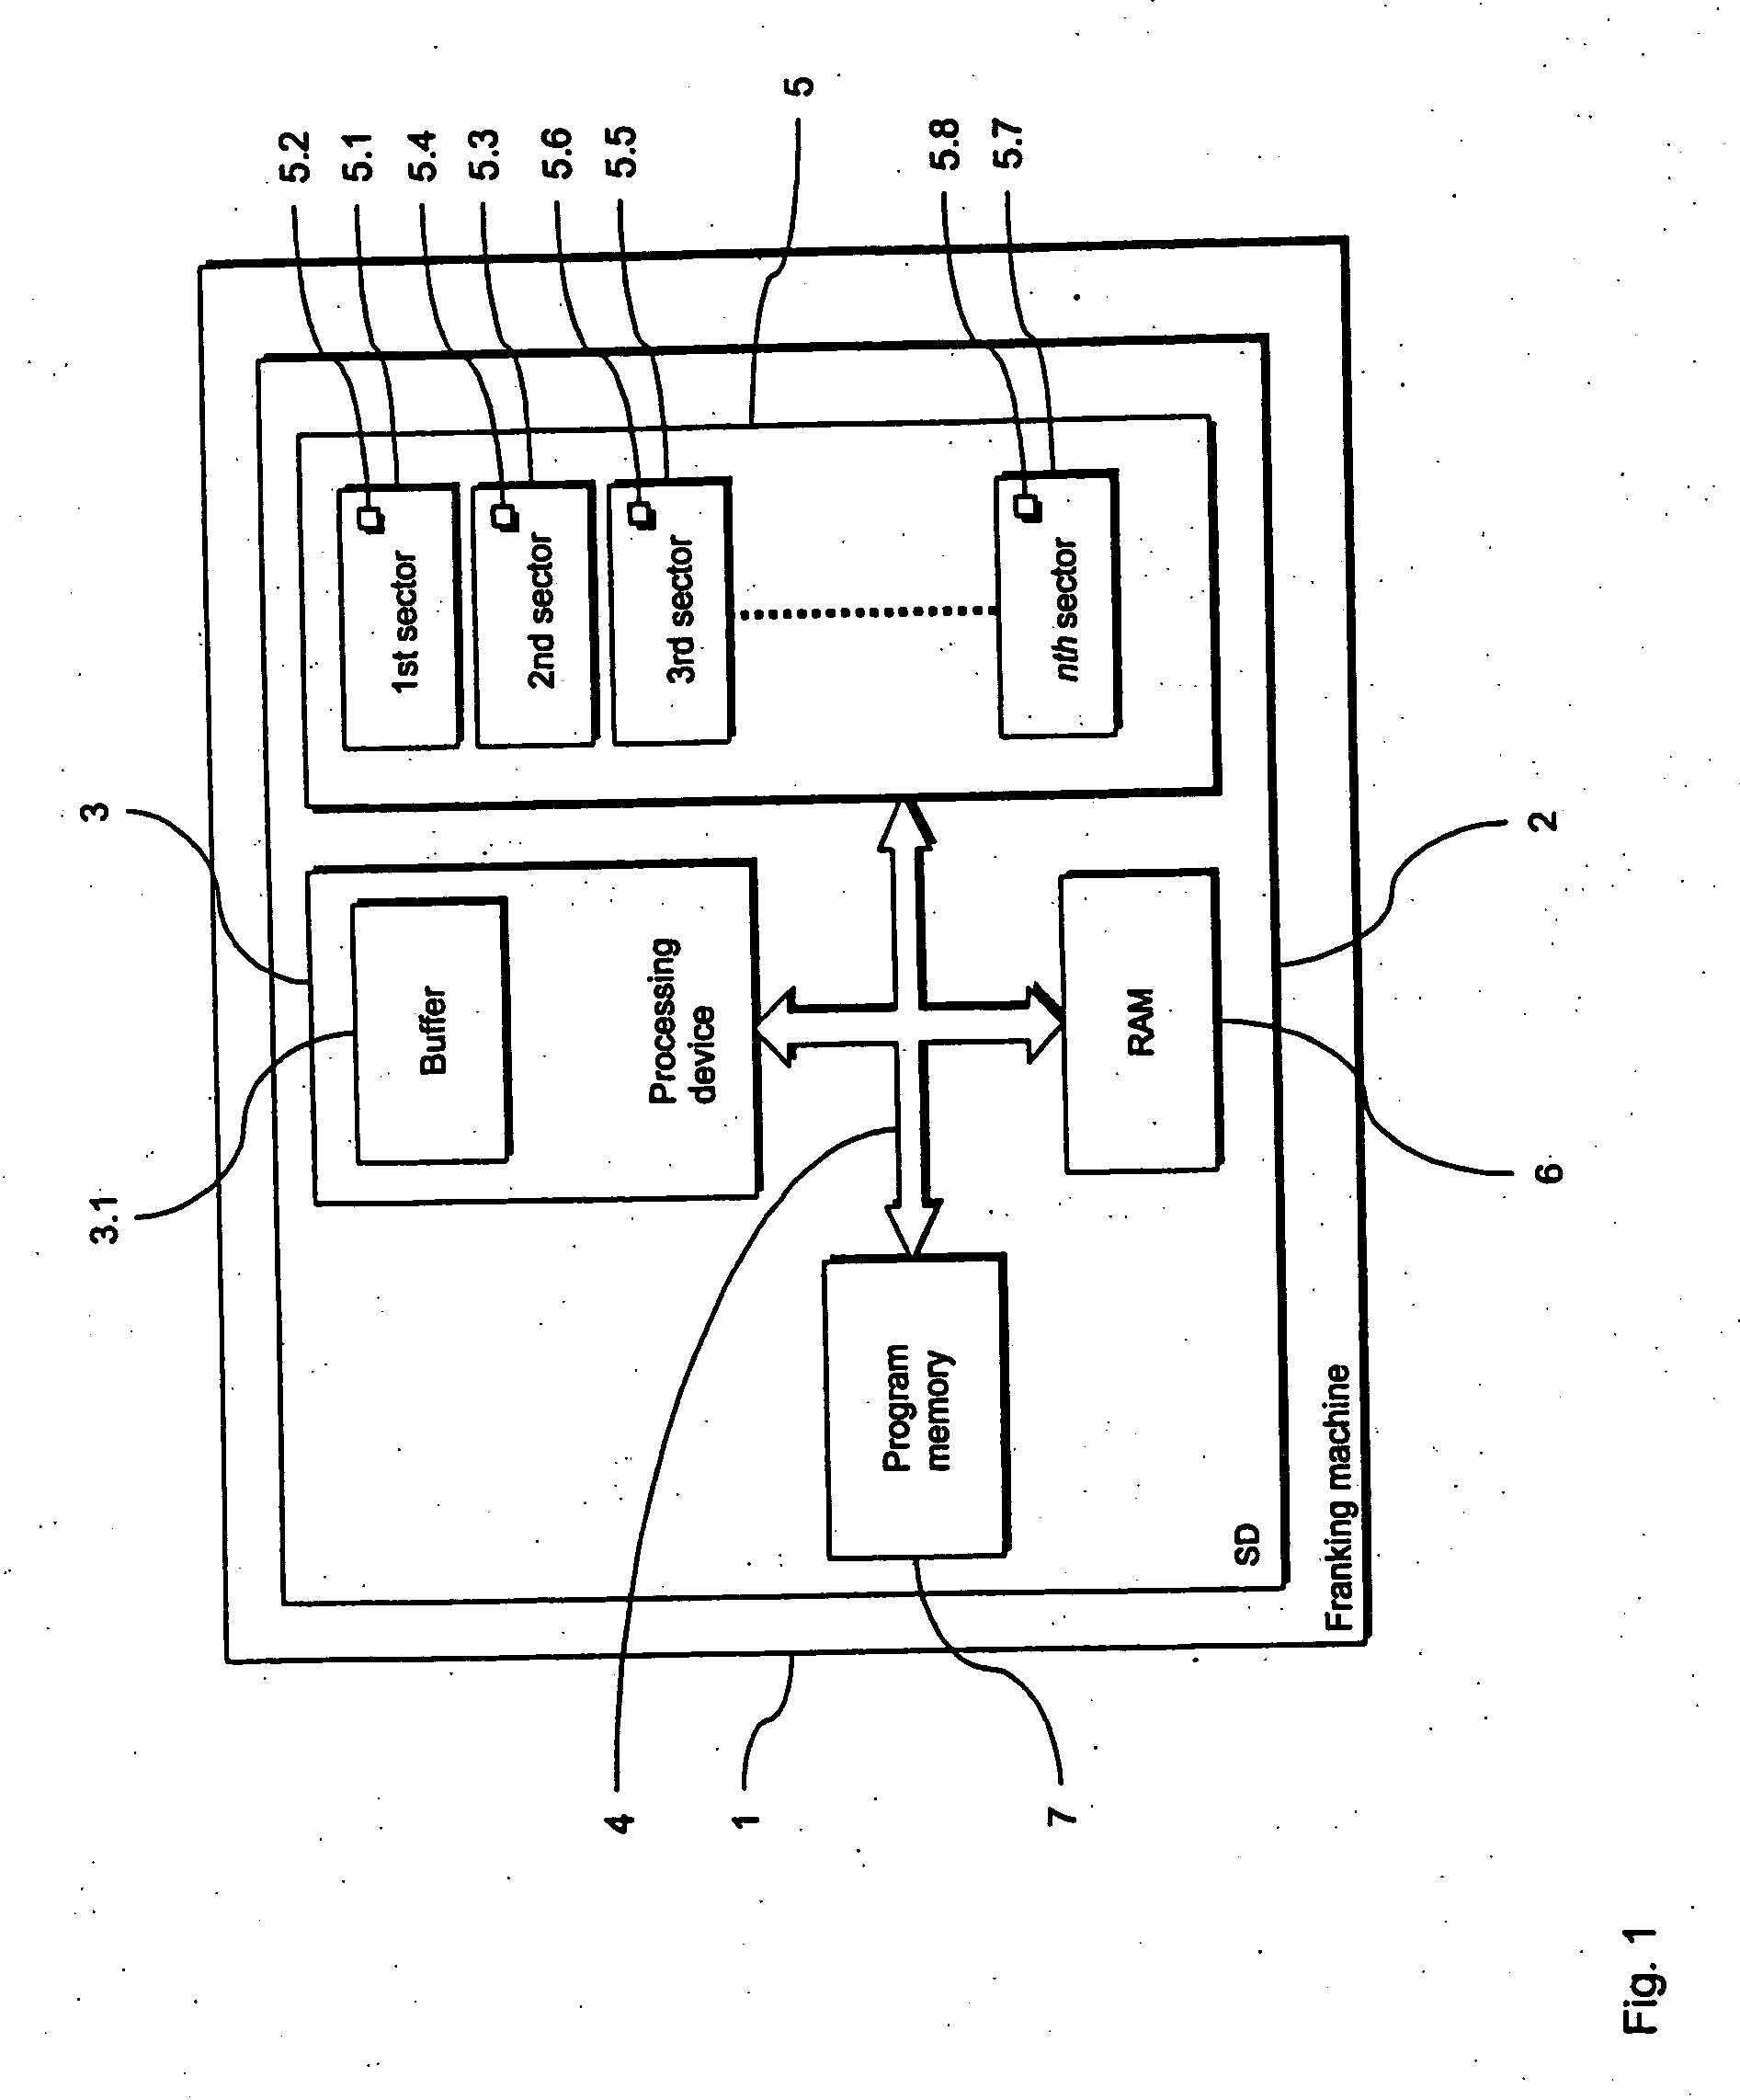 Method and arrangement for manipulation of the content of a data memory